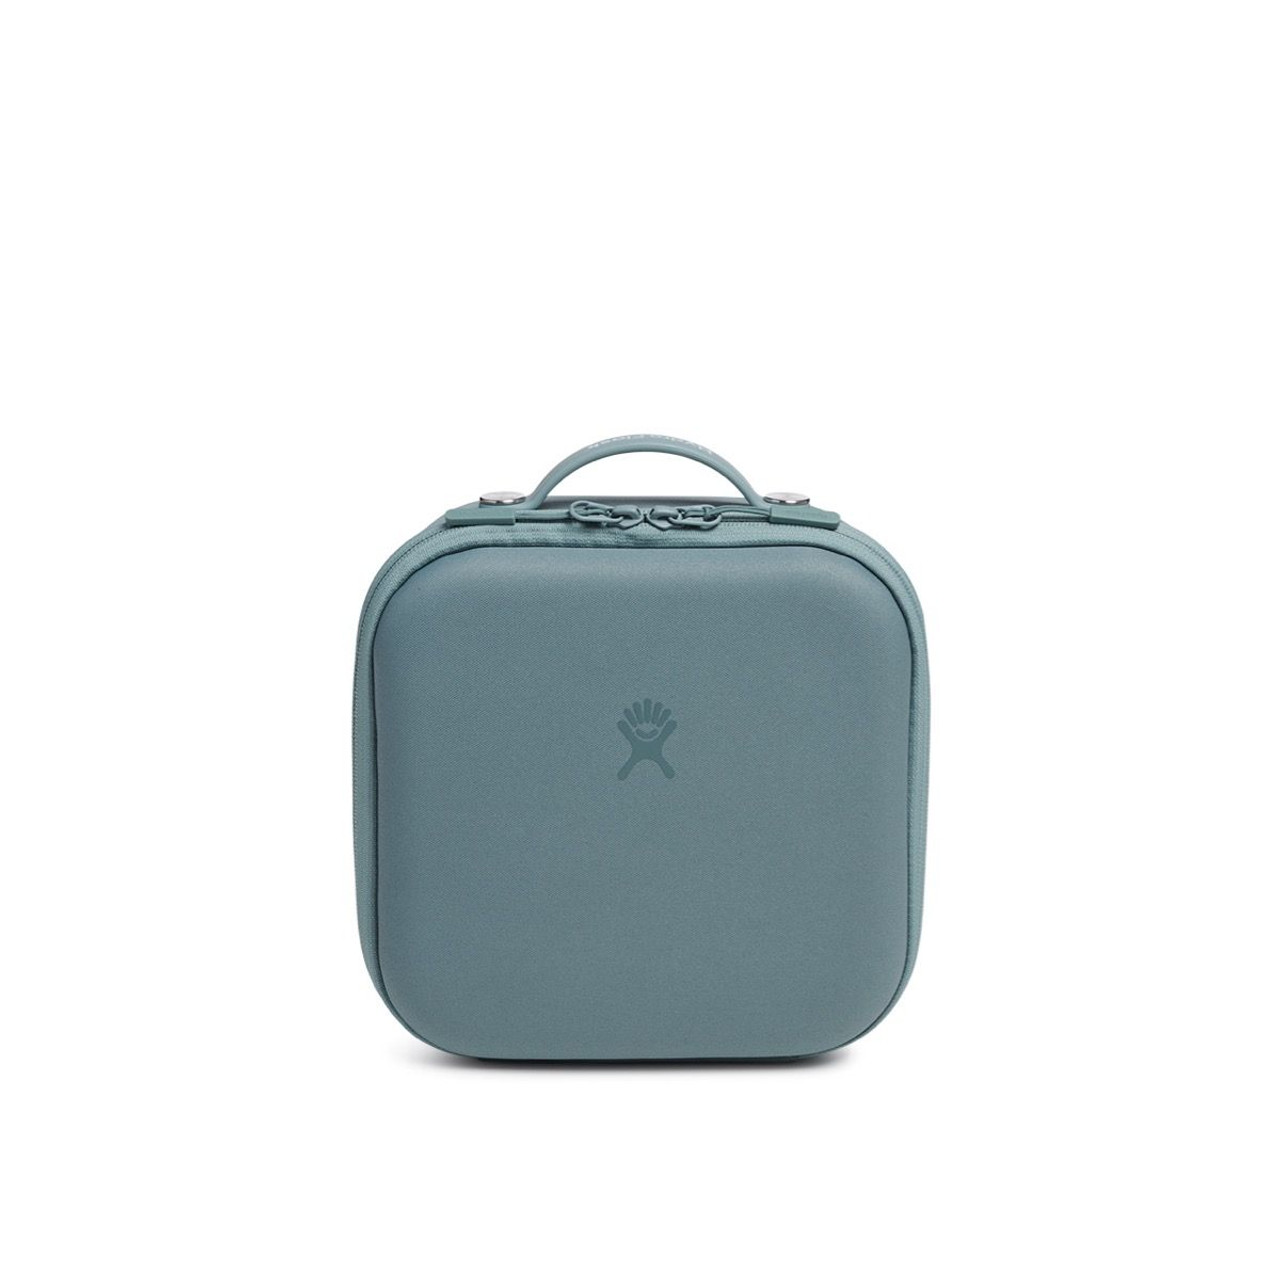 Hydro Flask Small Insulated Lunch Box - Hike & Camp